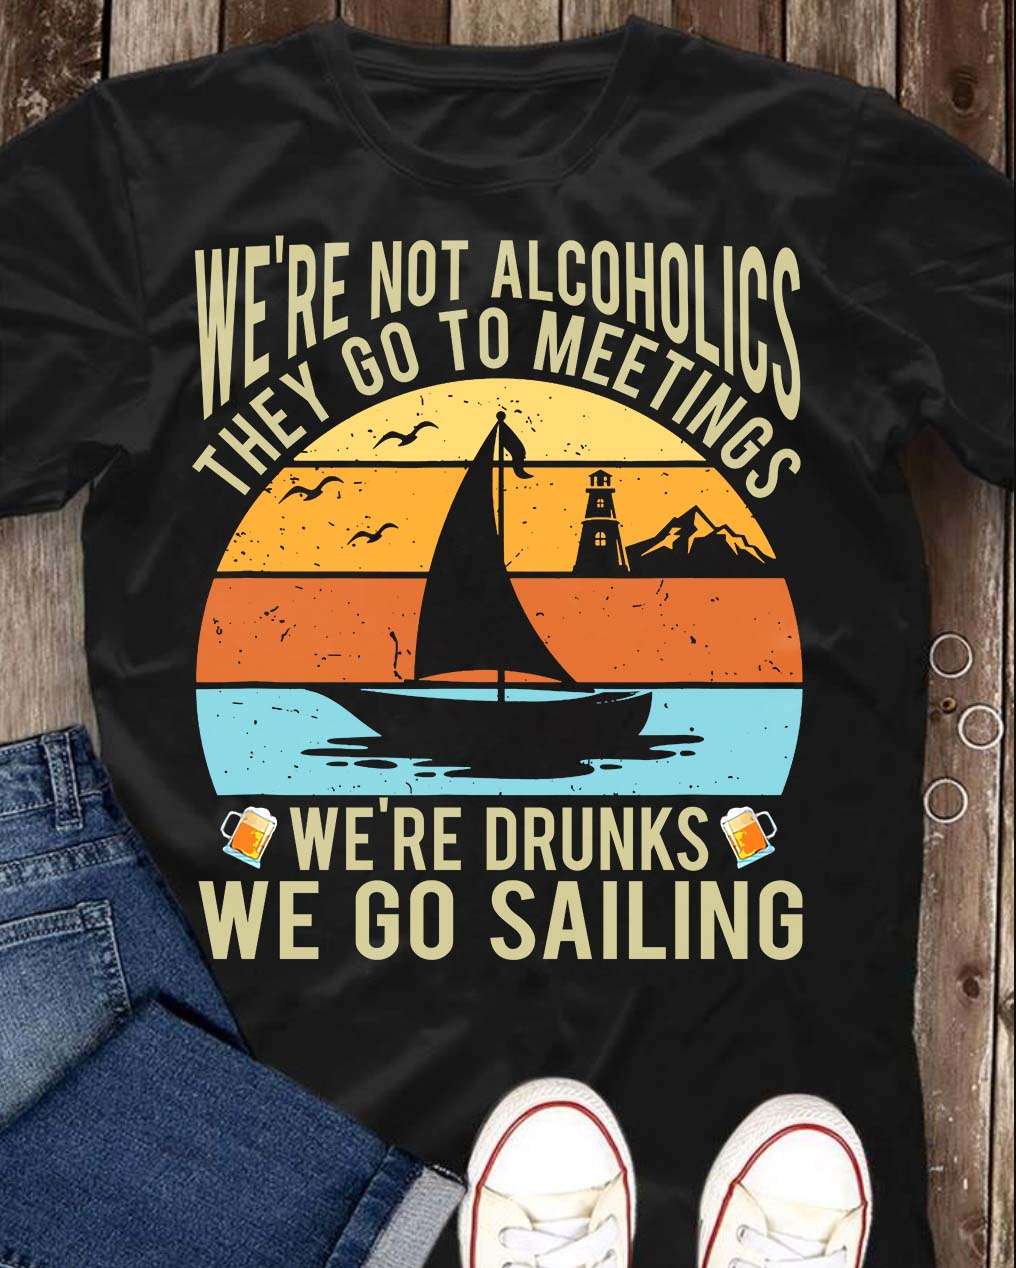 We're not alcoholics they go to meetings - we're drunks we go sailing, sailing and drinking